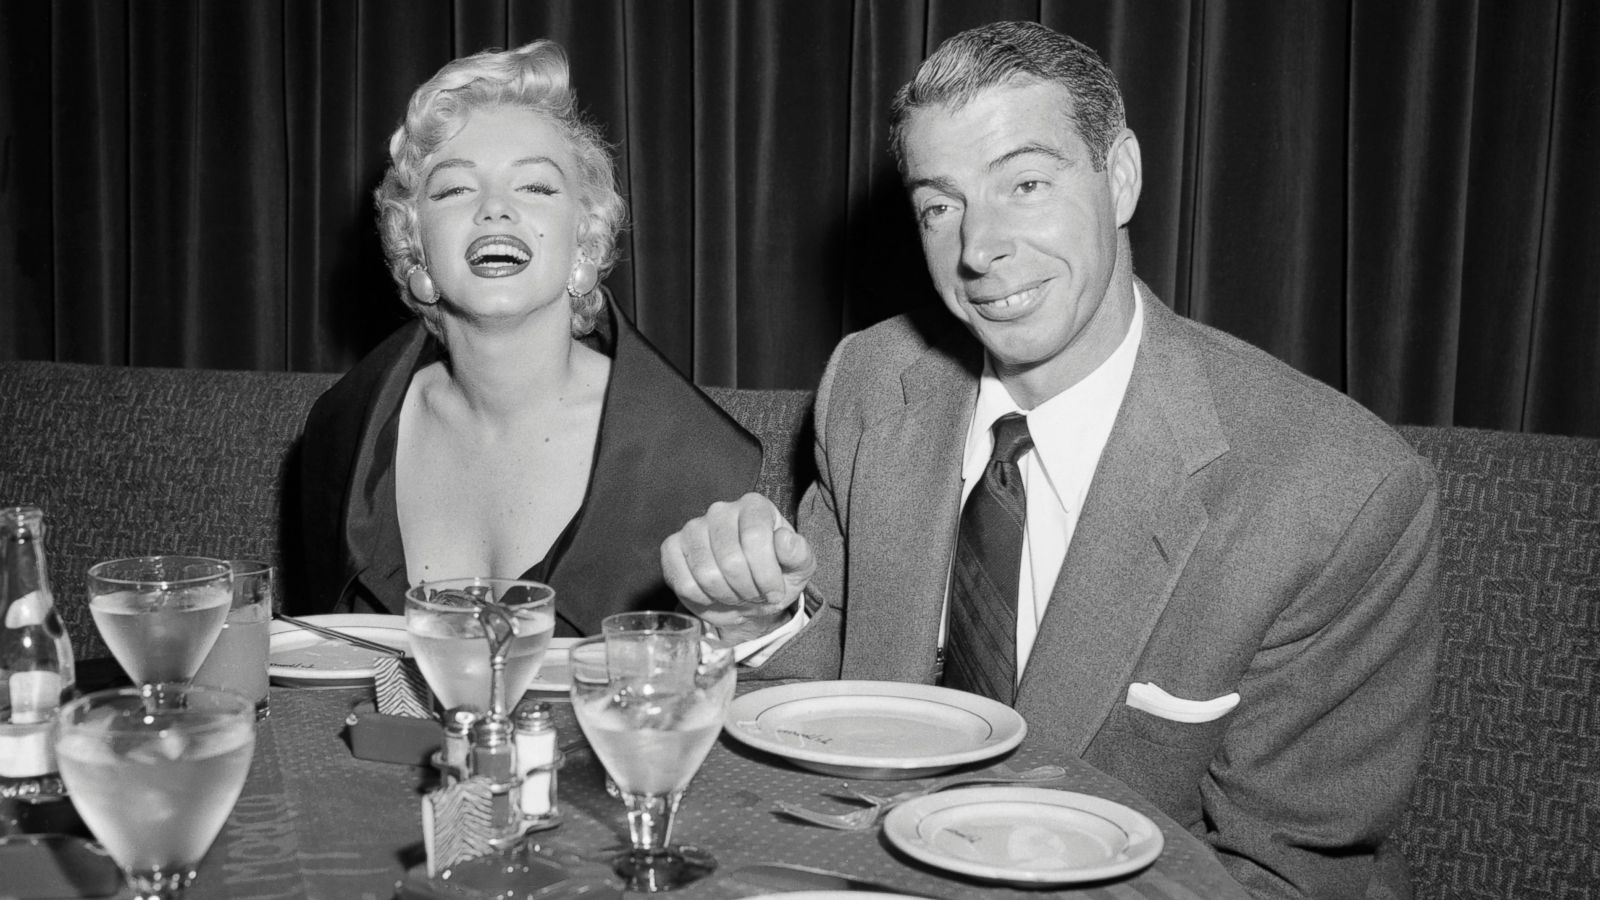 Images From Marilyn Monroe's Marriages - Pictures Documenting